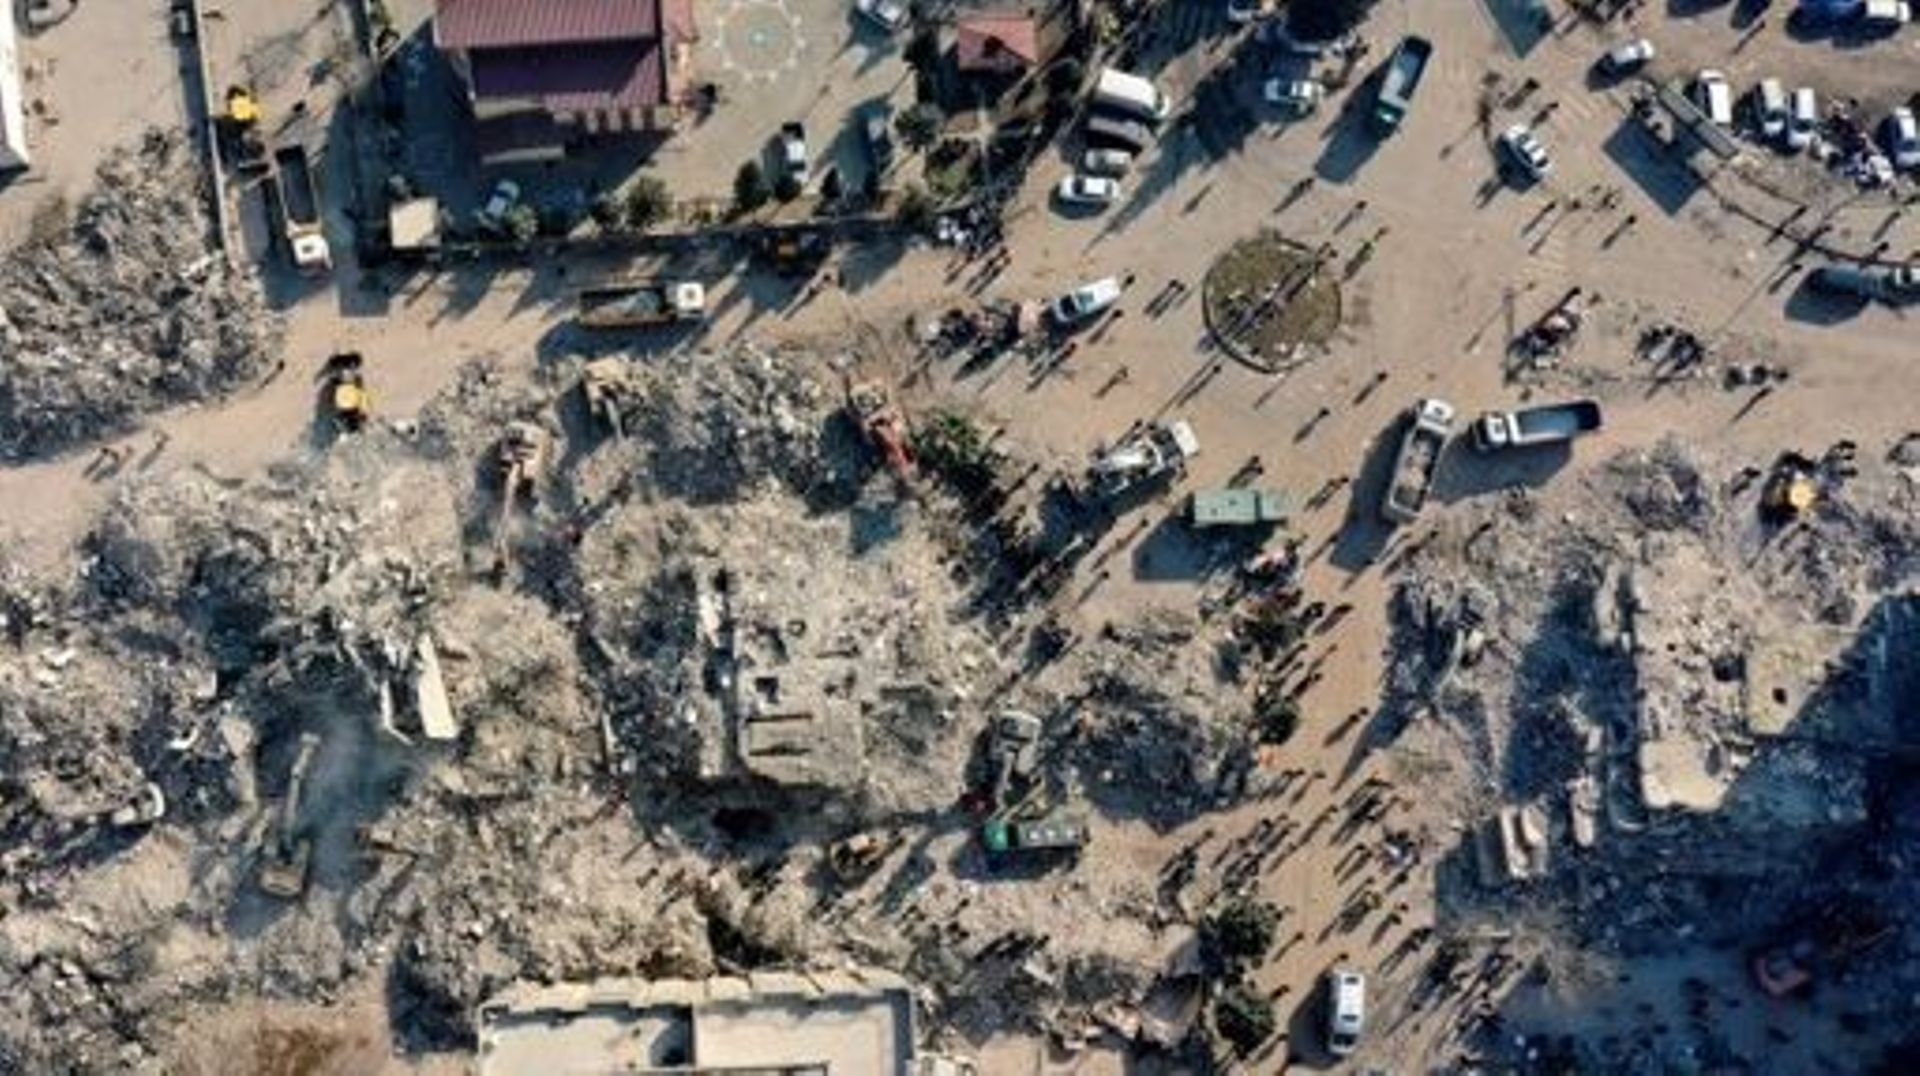 Handout picture released by El Salvador's presidency press office showing an aerial view of members of El Salvador's Urban Search and Rescue Team (USAR) during rescue operations in Sehit Aileleri, Kahramanmaraş, Turkey on February 12, 2023. A rescue team 